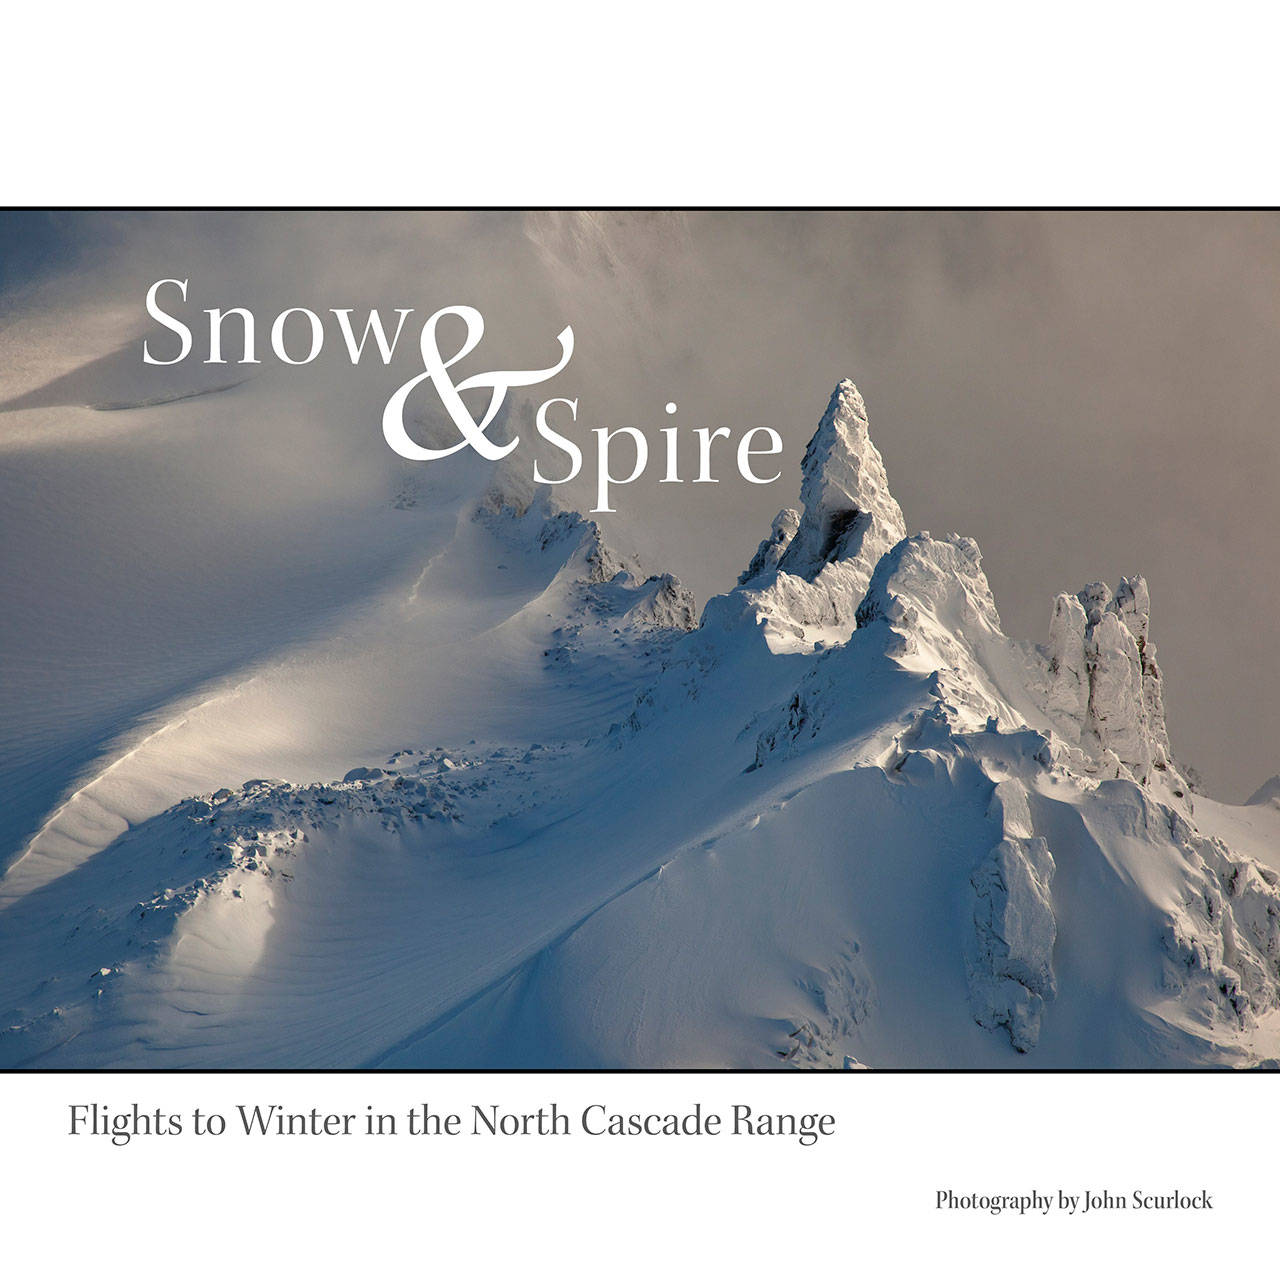 Image courtesy of Eagle Harbor Book Company | Eagle Harbor Book Company will host aerial photographer and pilot John Scurlock to discuss his book “Snow and Spire: Flights to Winter in the North Cascades” at 7:30 p.m. Thursday, July 25.